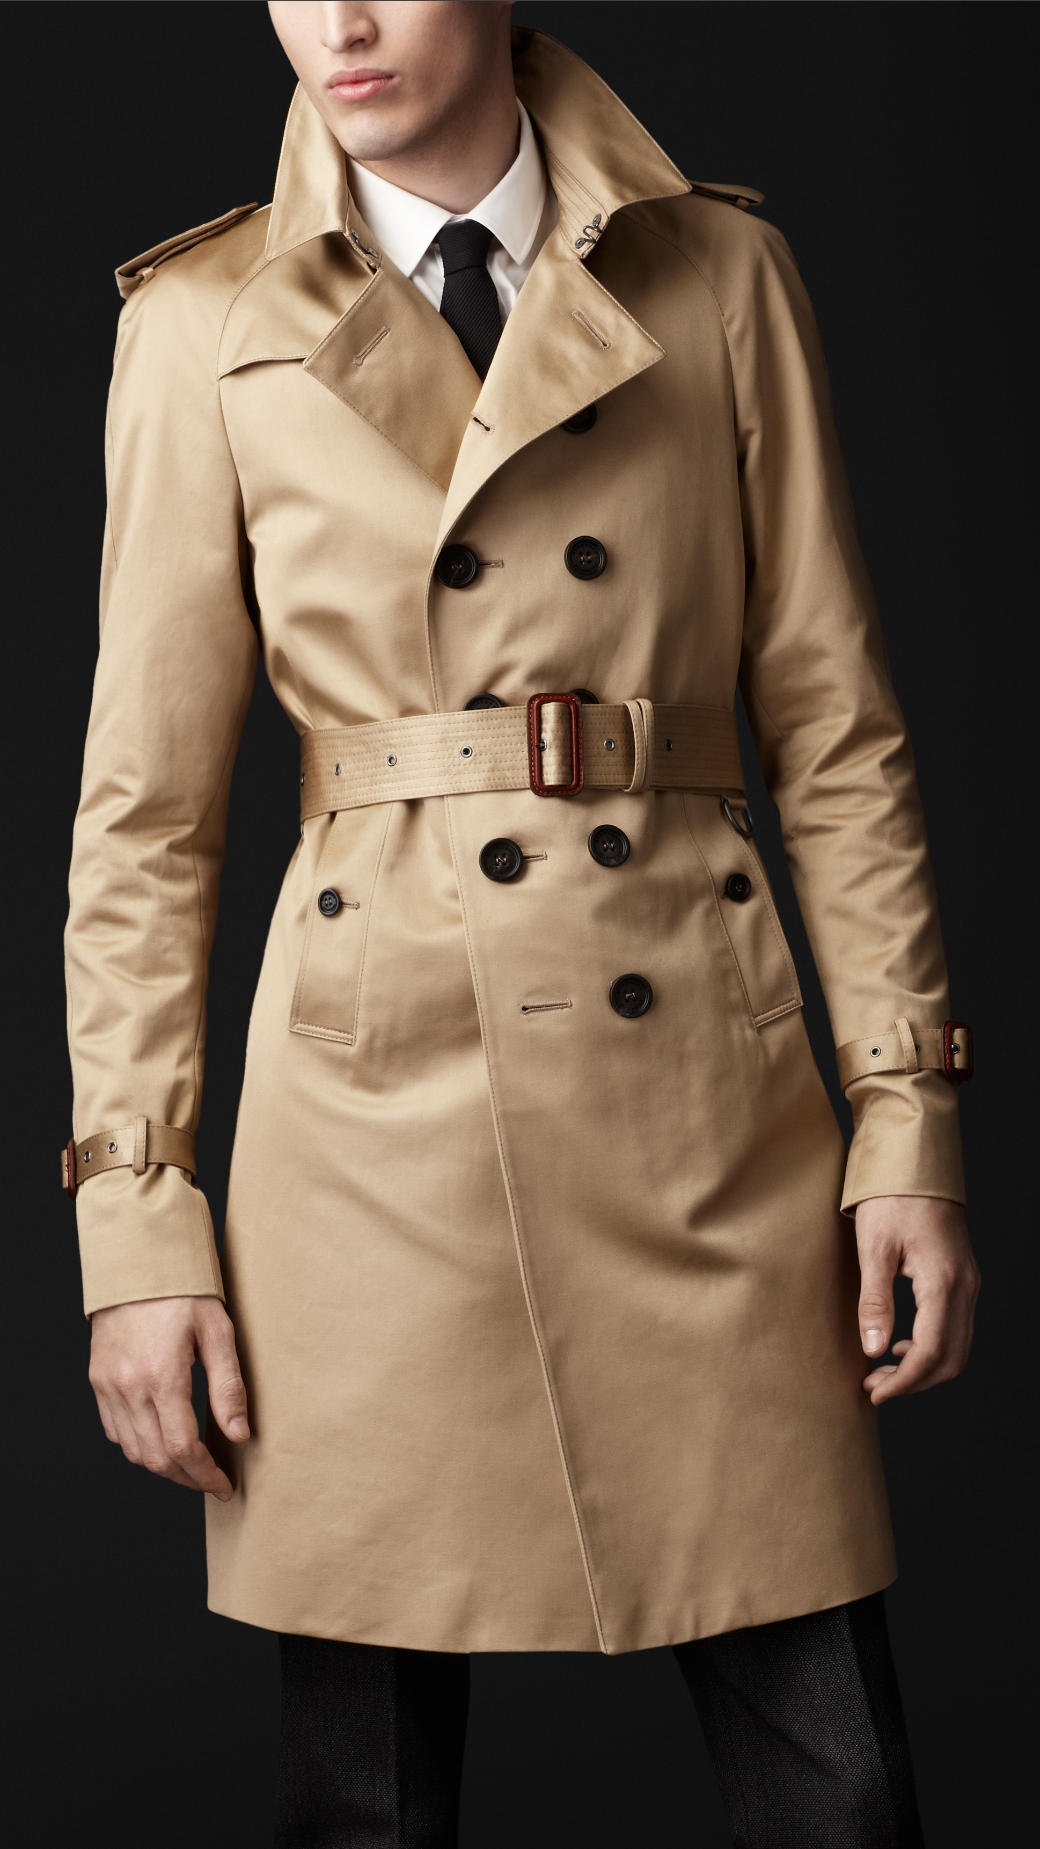 Lyst - Burberry Prorsum Cotton Military Trench Coat in Natural for Men